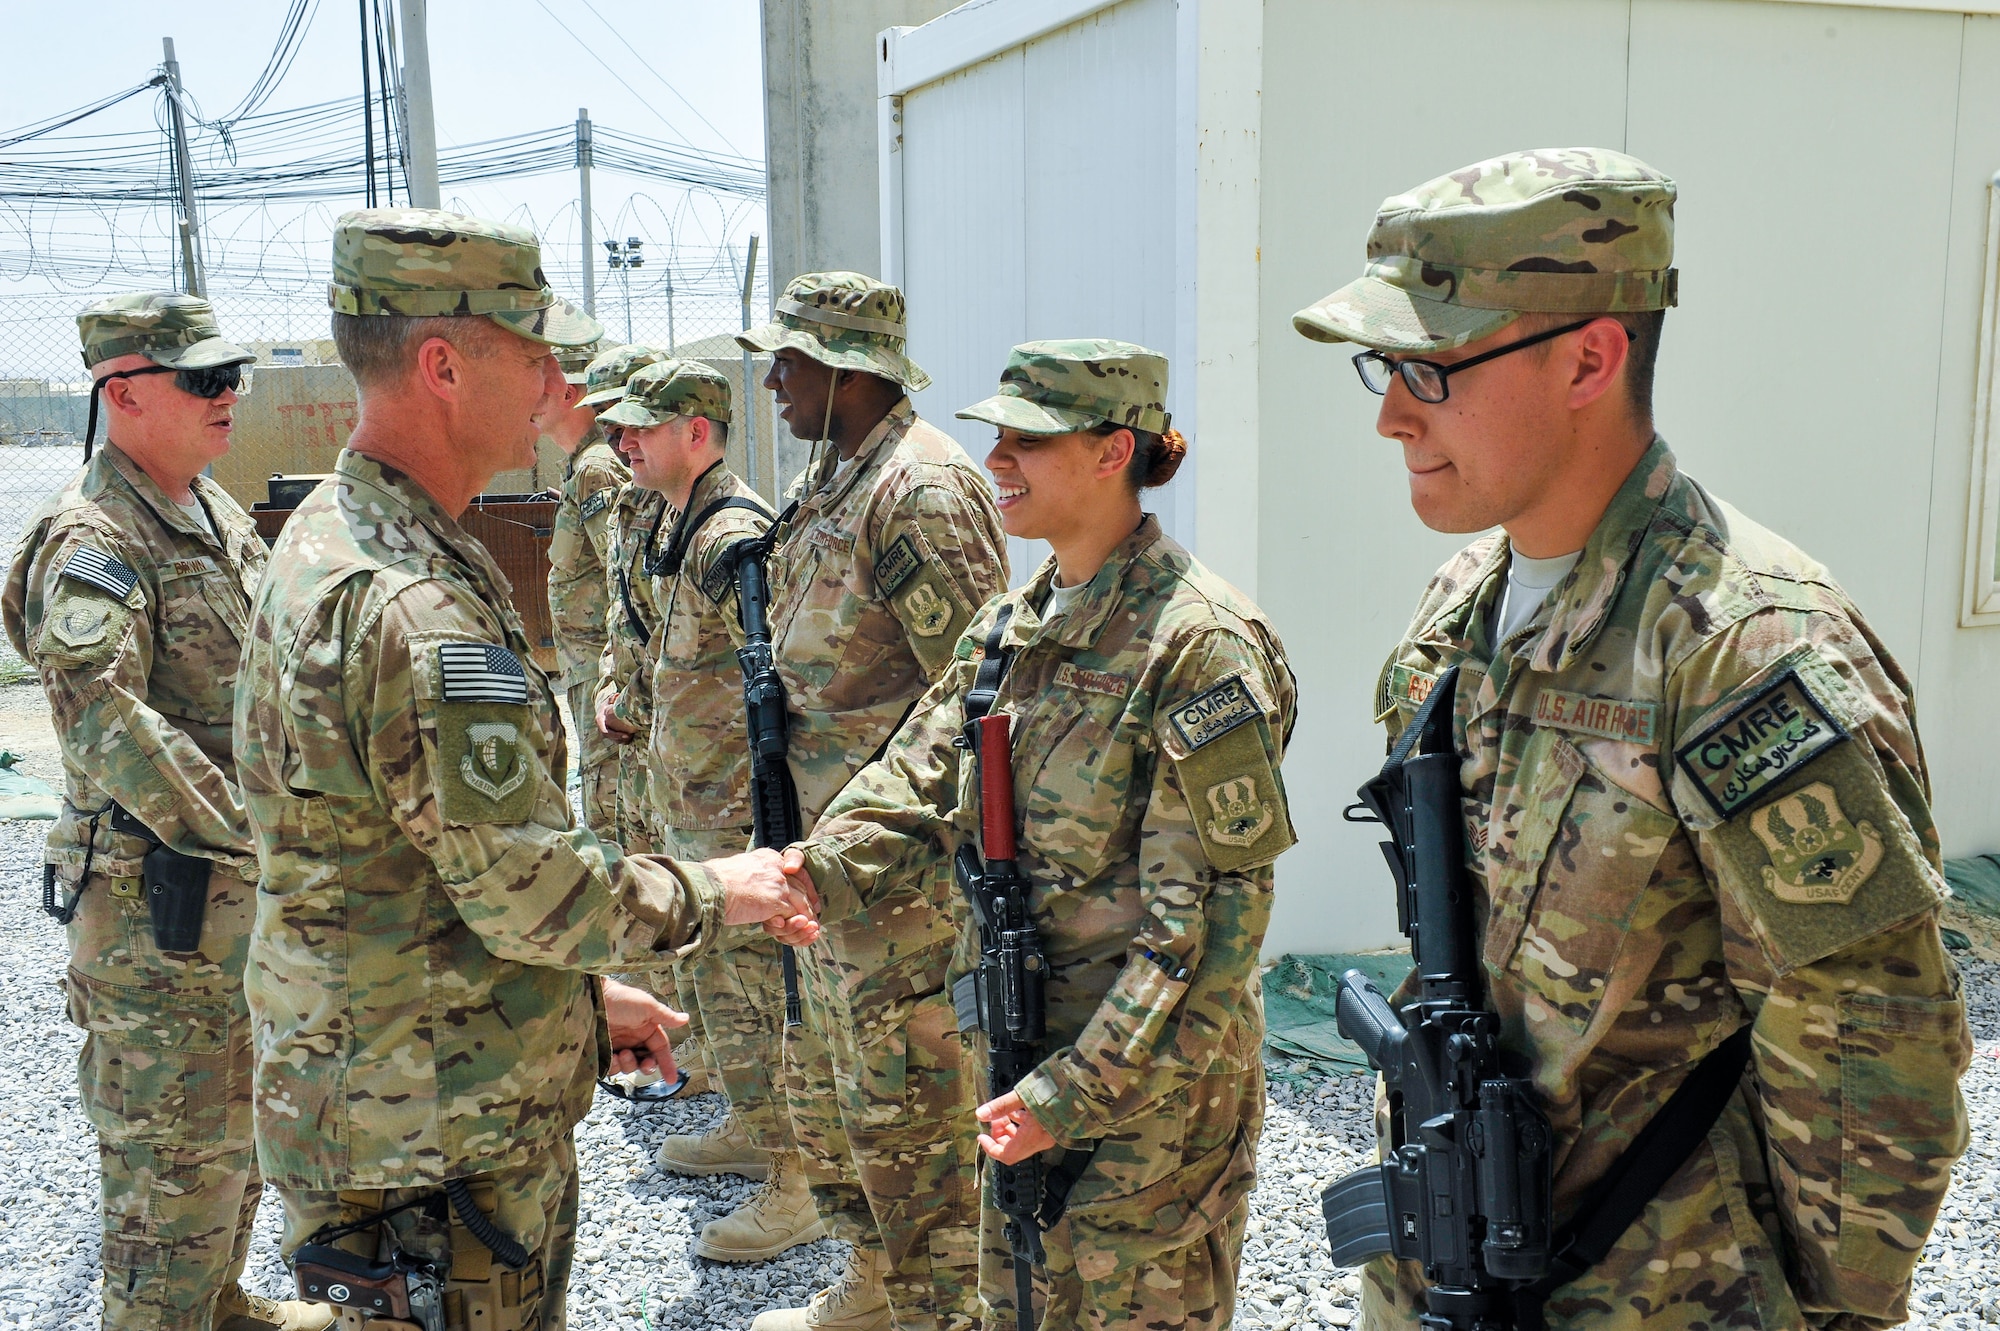 U.S. Air Force Brig. Gen. Mark D. Kelly, 455th Air Expeditionary Wing commander, and Chief Master Sgt. Jeffery Brown, 455th AEW command chief, meet with Airmen assigned to the 451st Air Expeditionary Group during a visit to Kandahar Airfield, Afghanistan, May 3, 2015.  The general along with the chief met with Airmen from across the group who provide intelligence, surveillance and reconnaissance, command and control, personnel recovery, and airborne datalink capabilities to commanders in the Afghanistan theater of operations. (U.S. Air Force photo by Maj. Tony Wickman/Released)